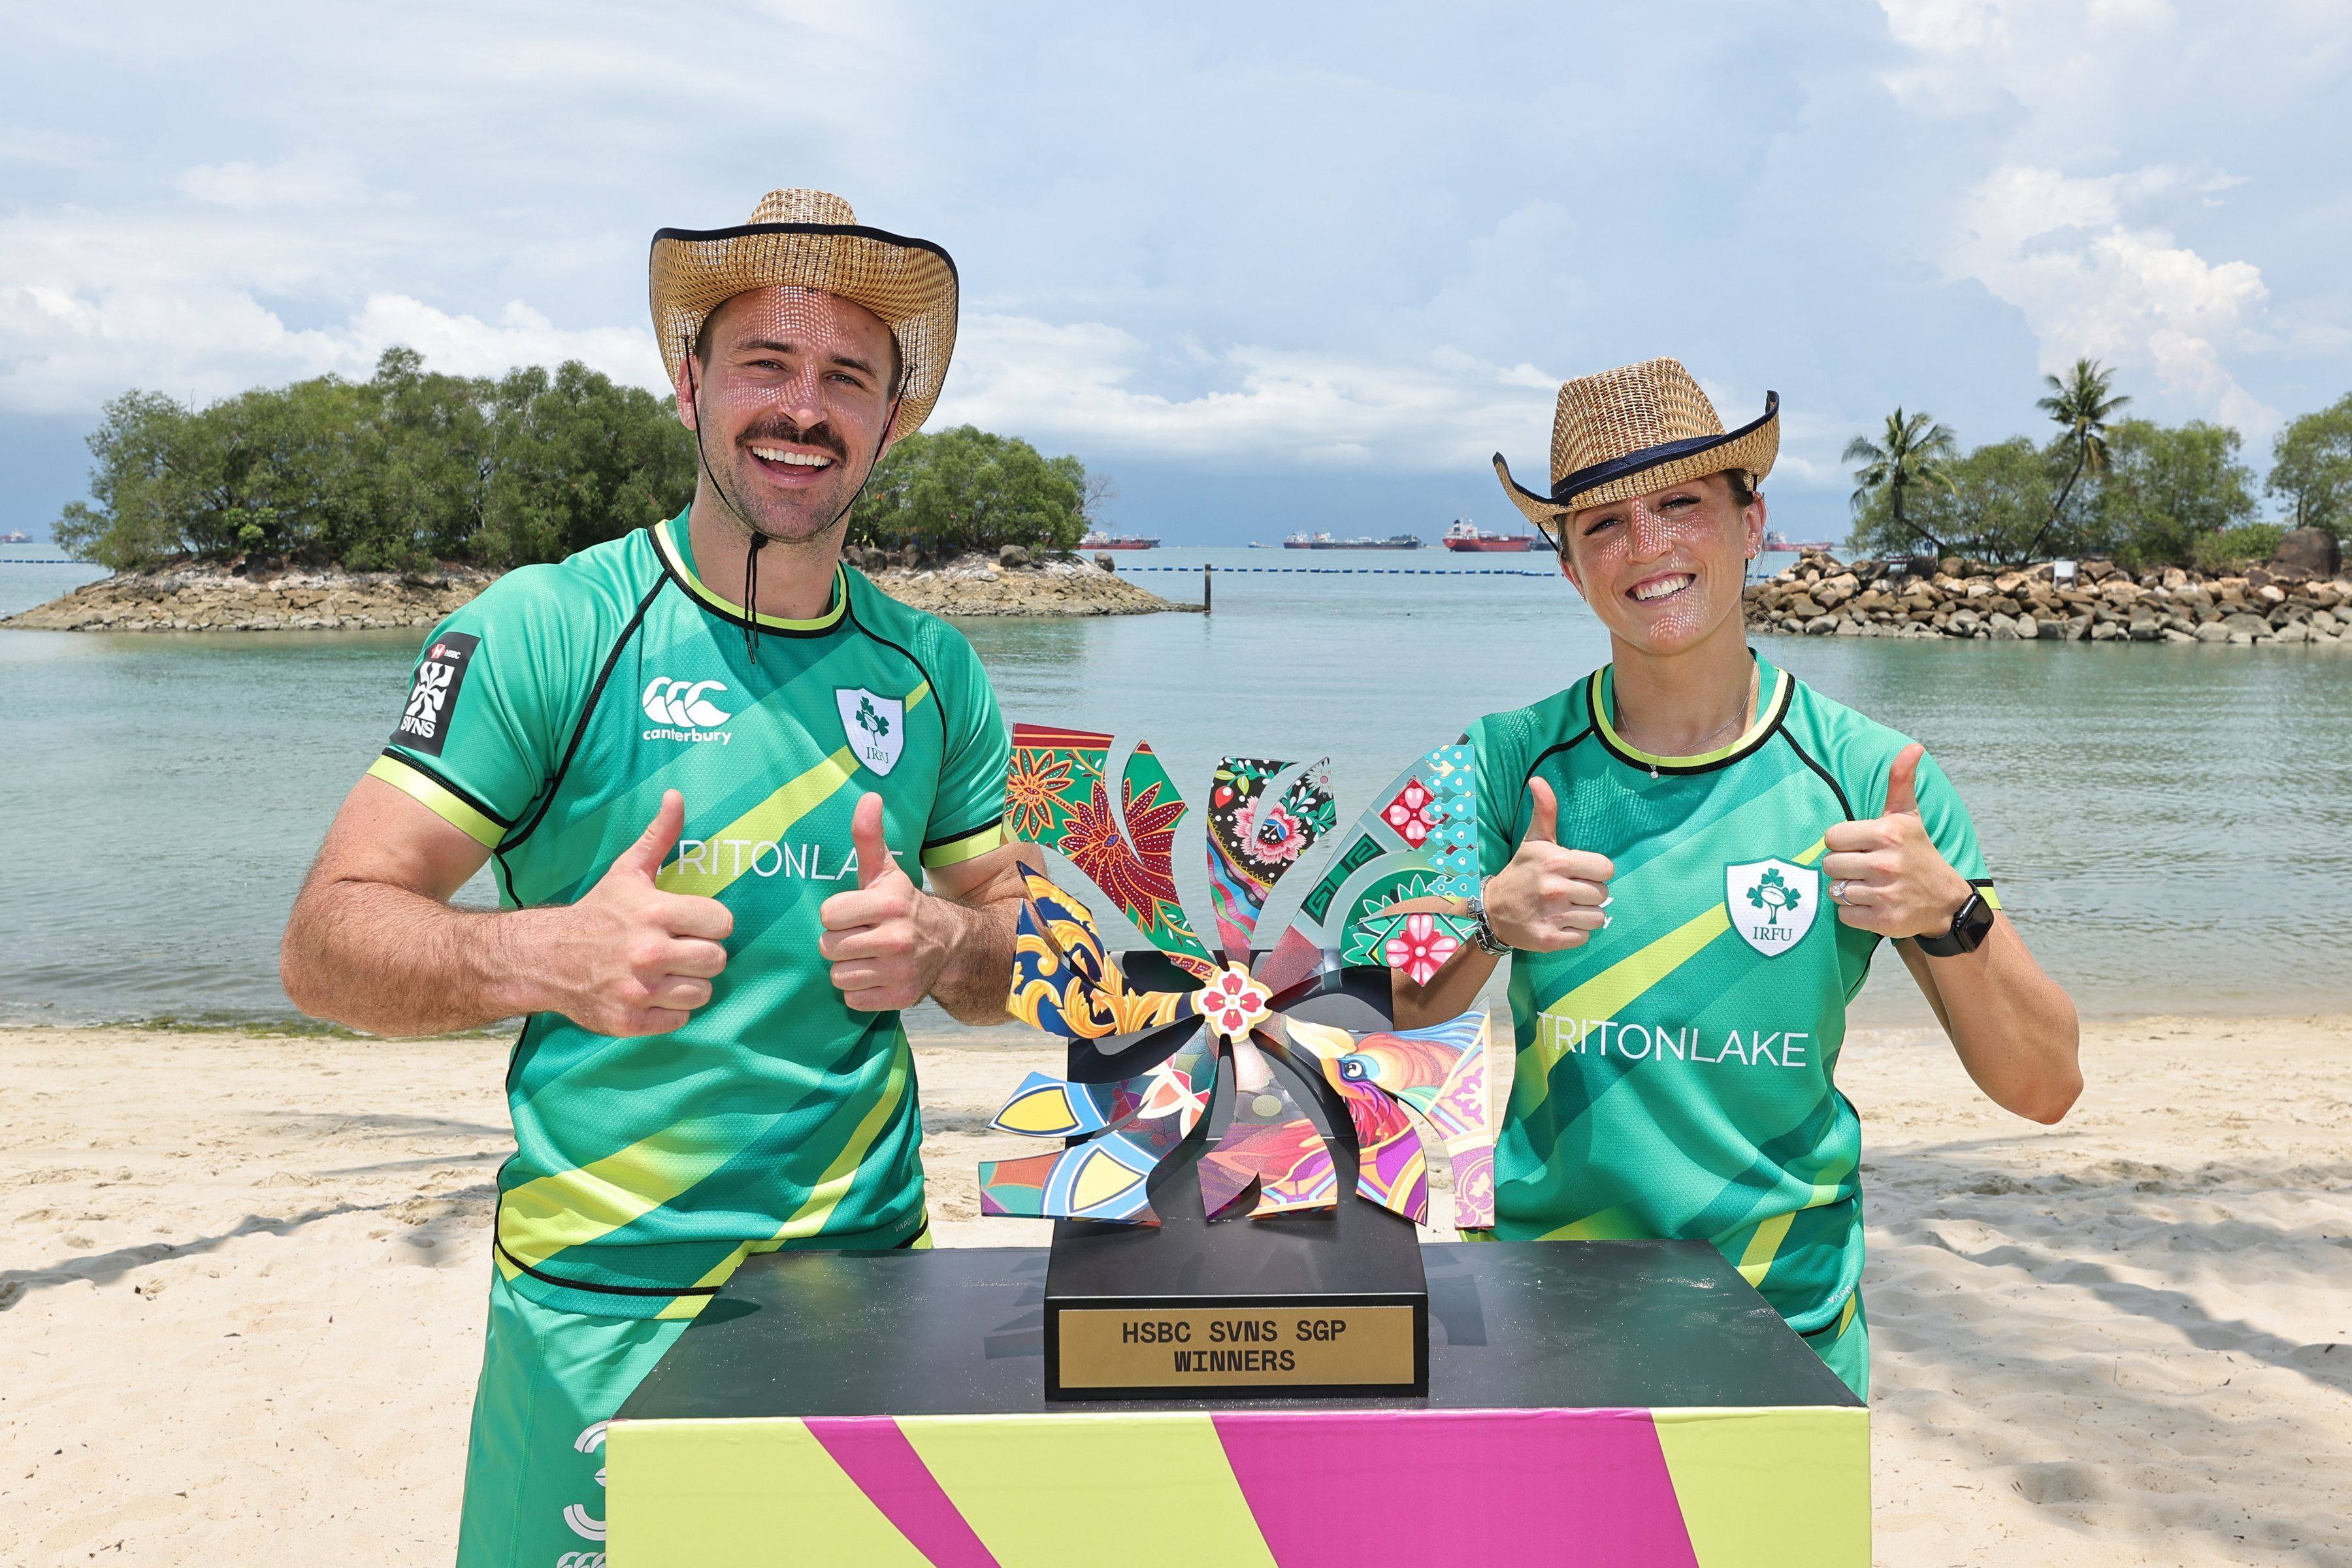 Irish team captains Harry McNulty (left) and Amee-Leigh Murphy Crowe at Siloso Beach, Sentosa for the photo call before the Singapore Sevens. Photo: World Rugby